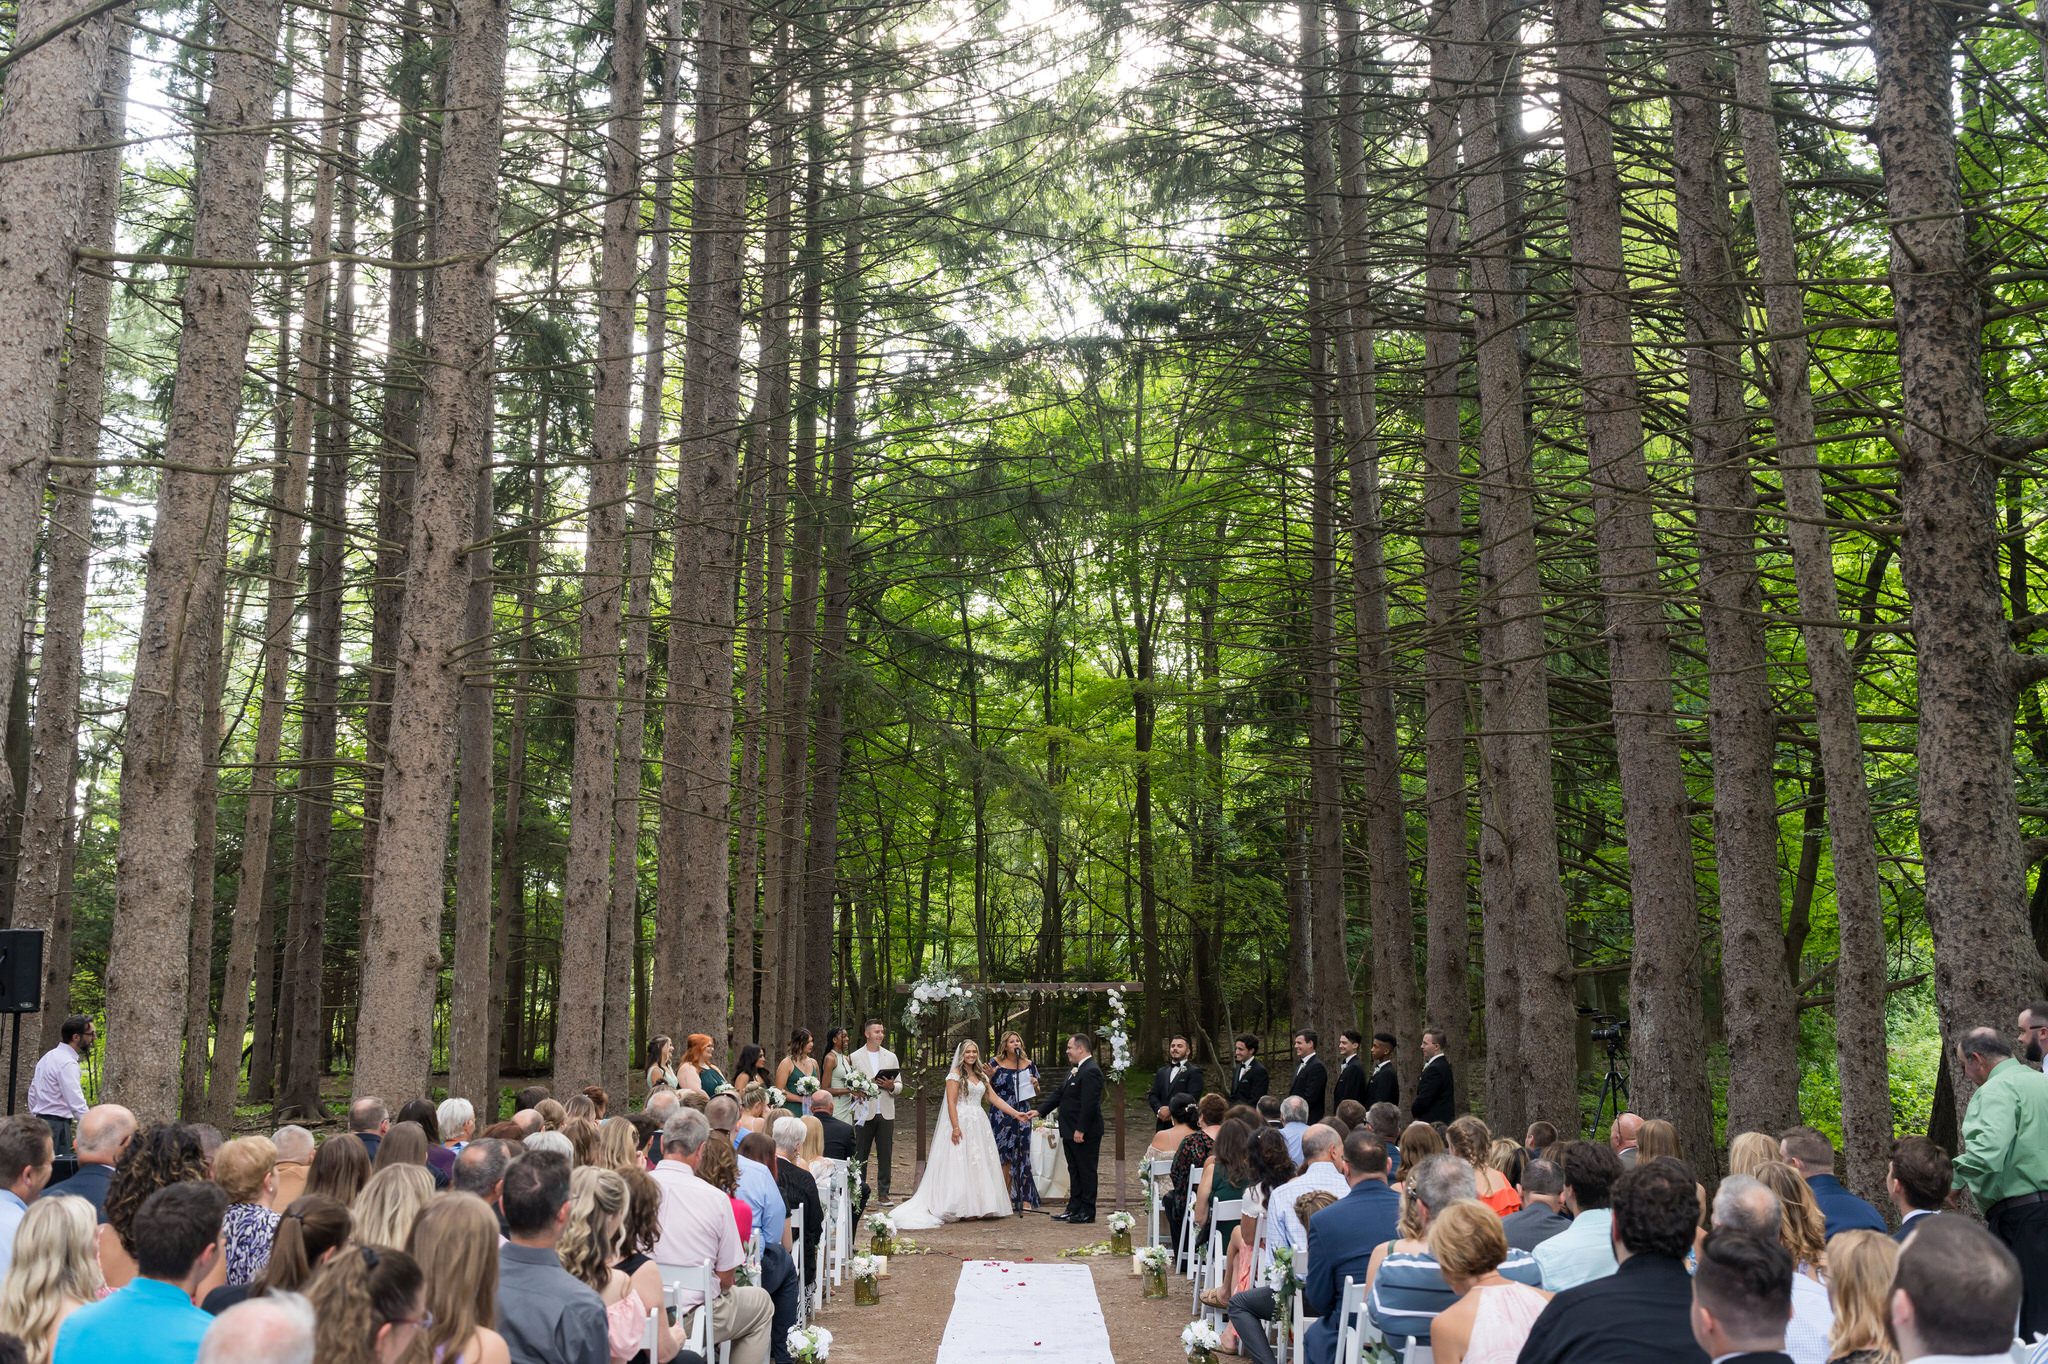 A Stony Creek wedding ceremony in the Pines.   